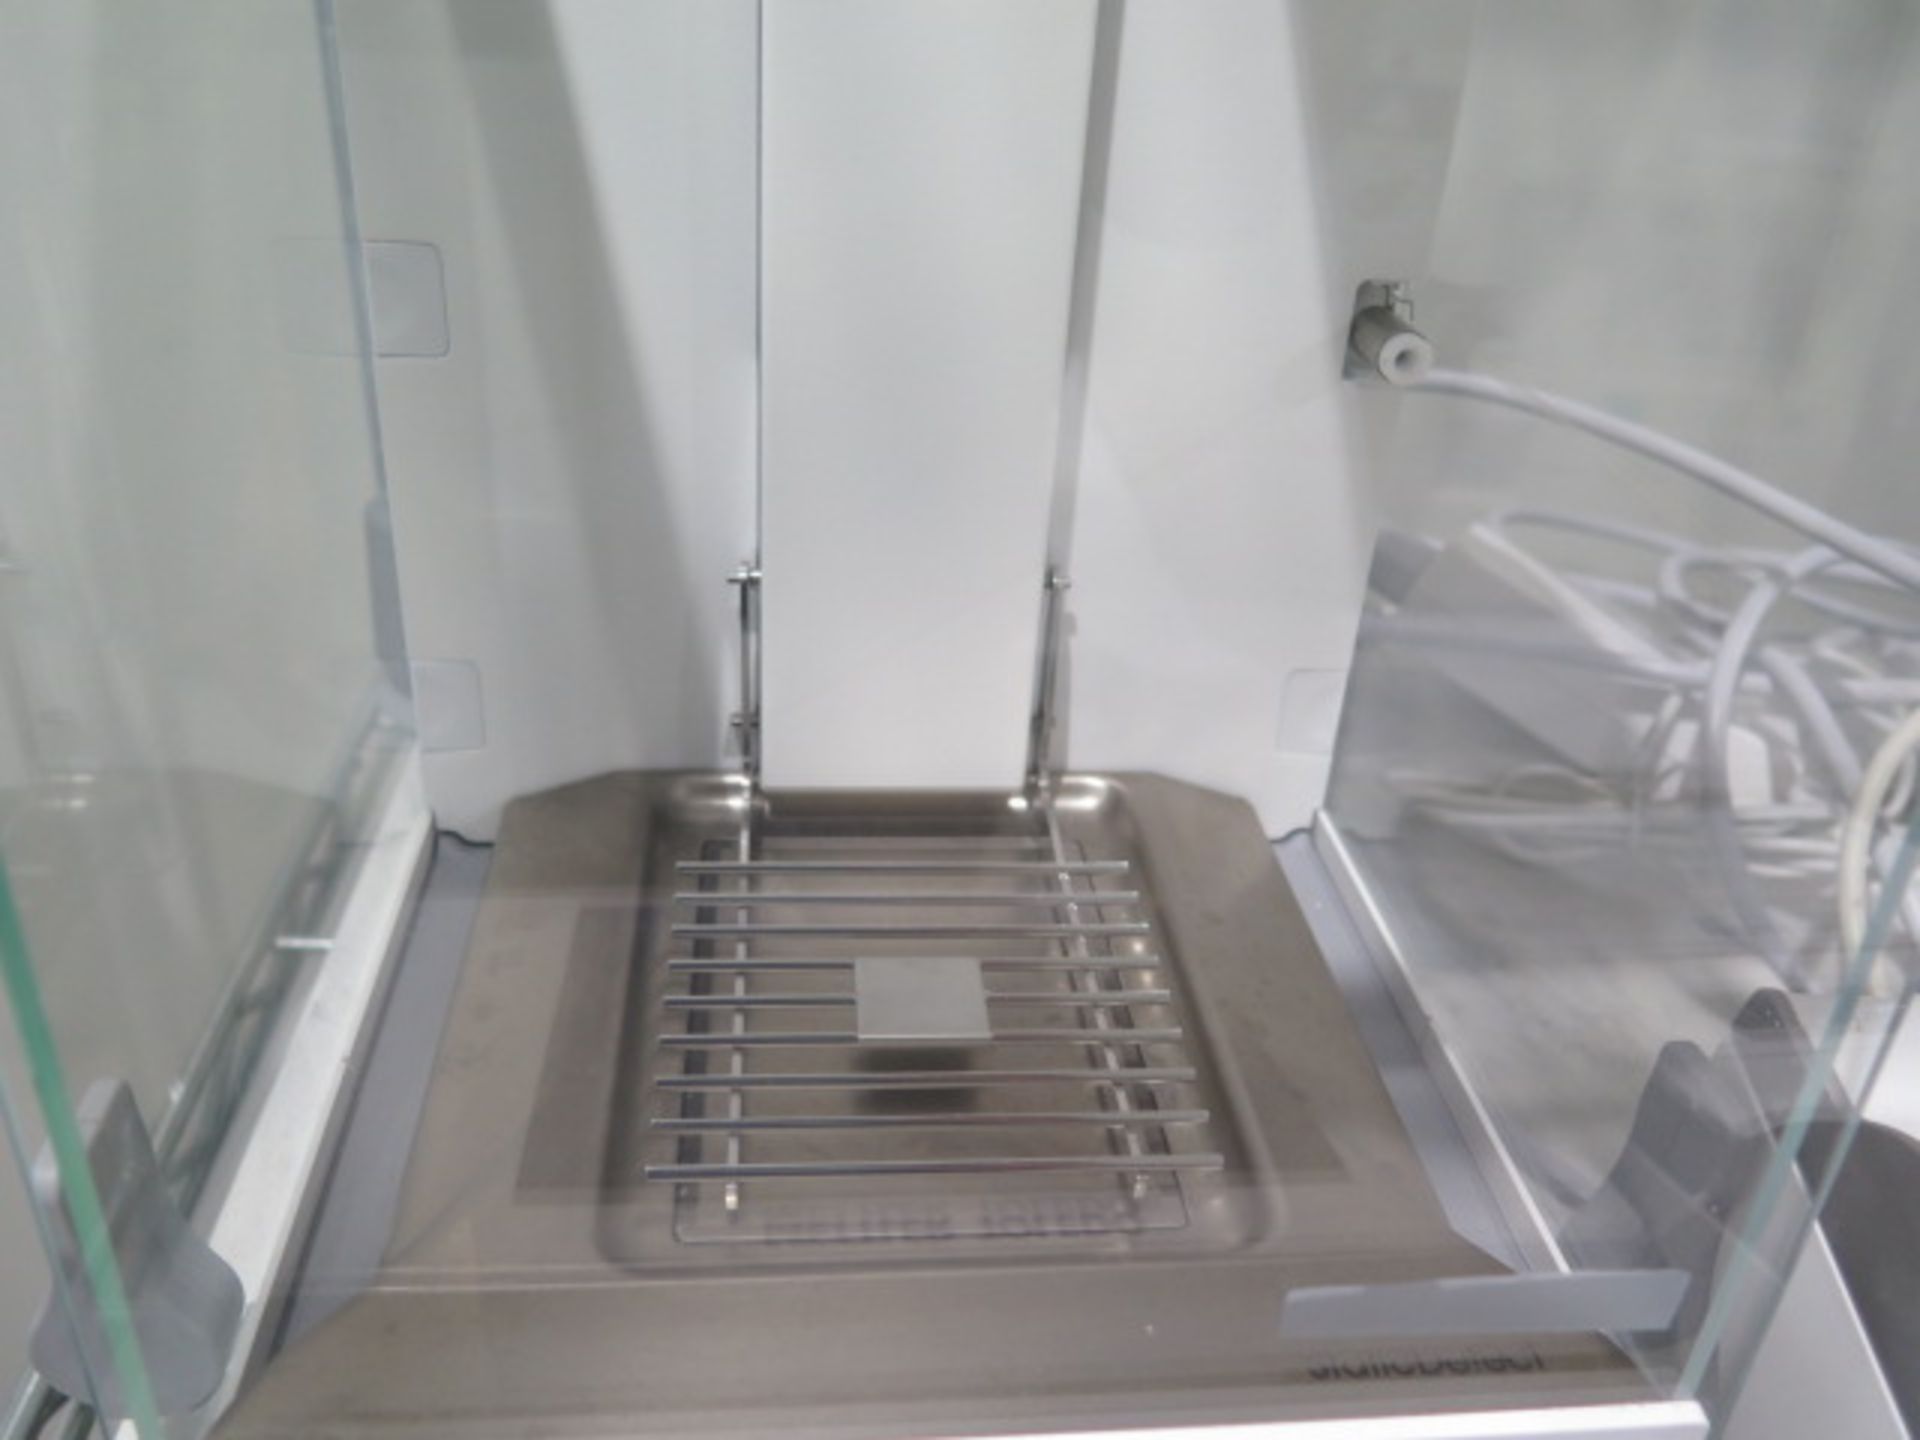 Mettler Toledo XPE205 DeltaRange Analytical Balance Scale 0.01mg-220g w/ Static Detect, SOLD AS IS - Image 4 of 8